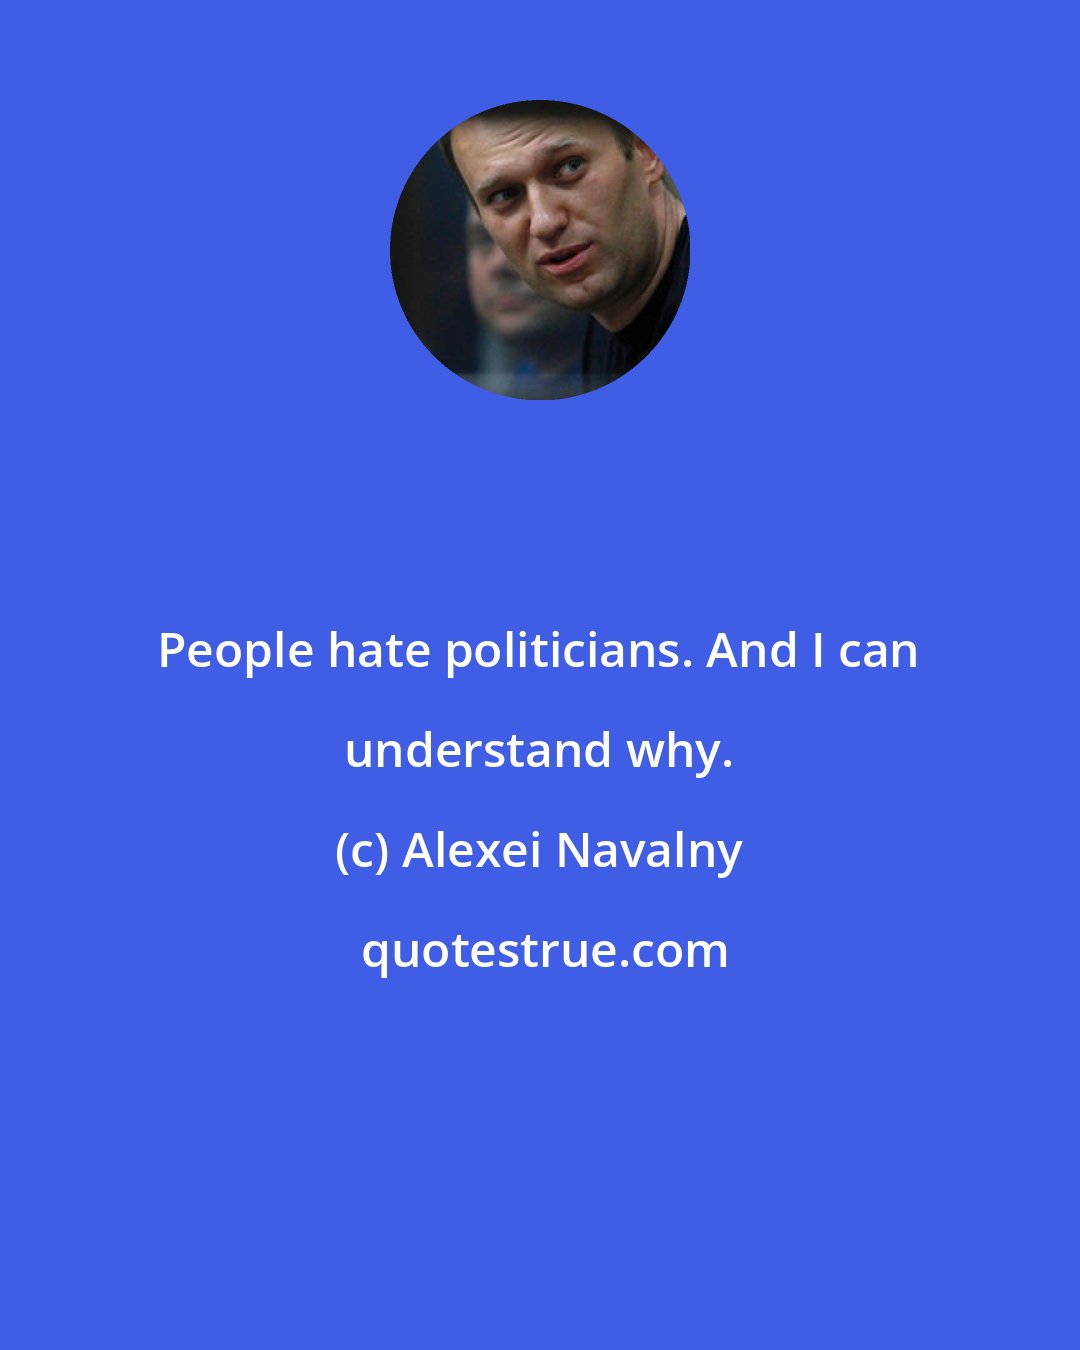 Alexei Navalny: People hate politicians. And I can understand why.